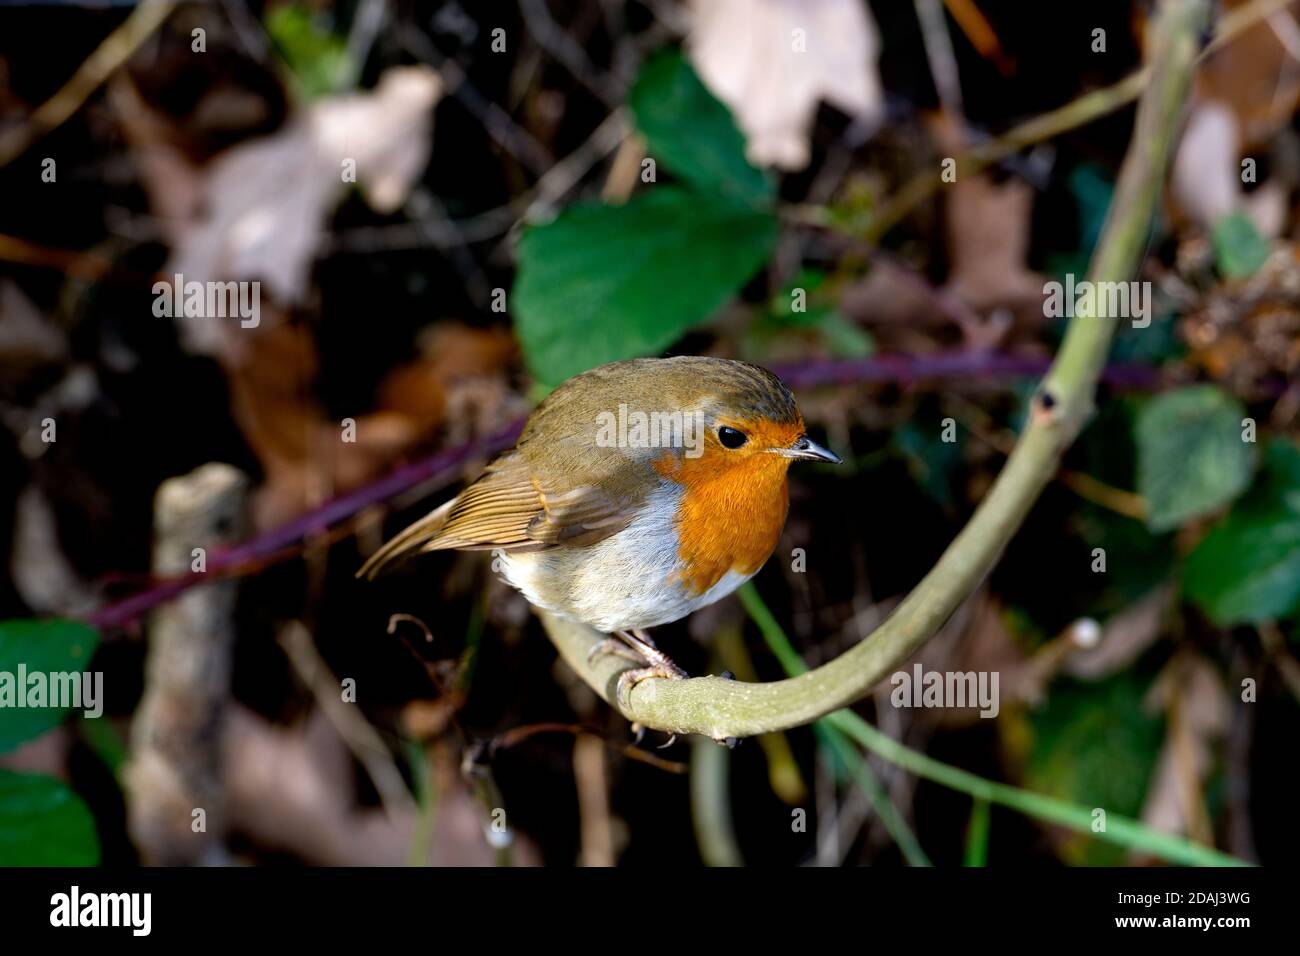 A Robin (Erithacus rubecula) perched in a hedgerow in autumn, Warwickshire, UK Stock Photo